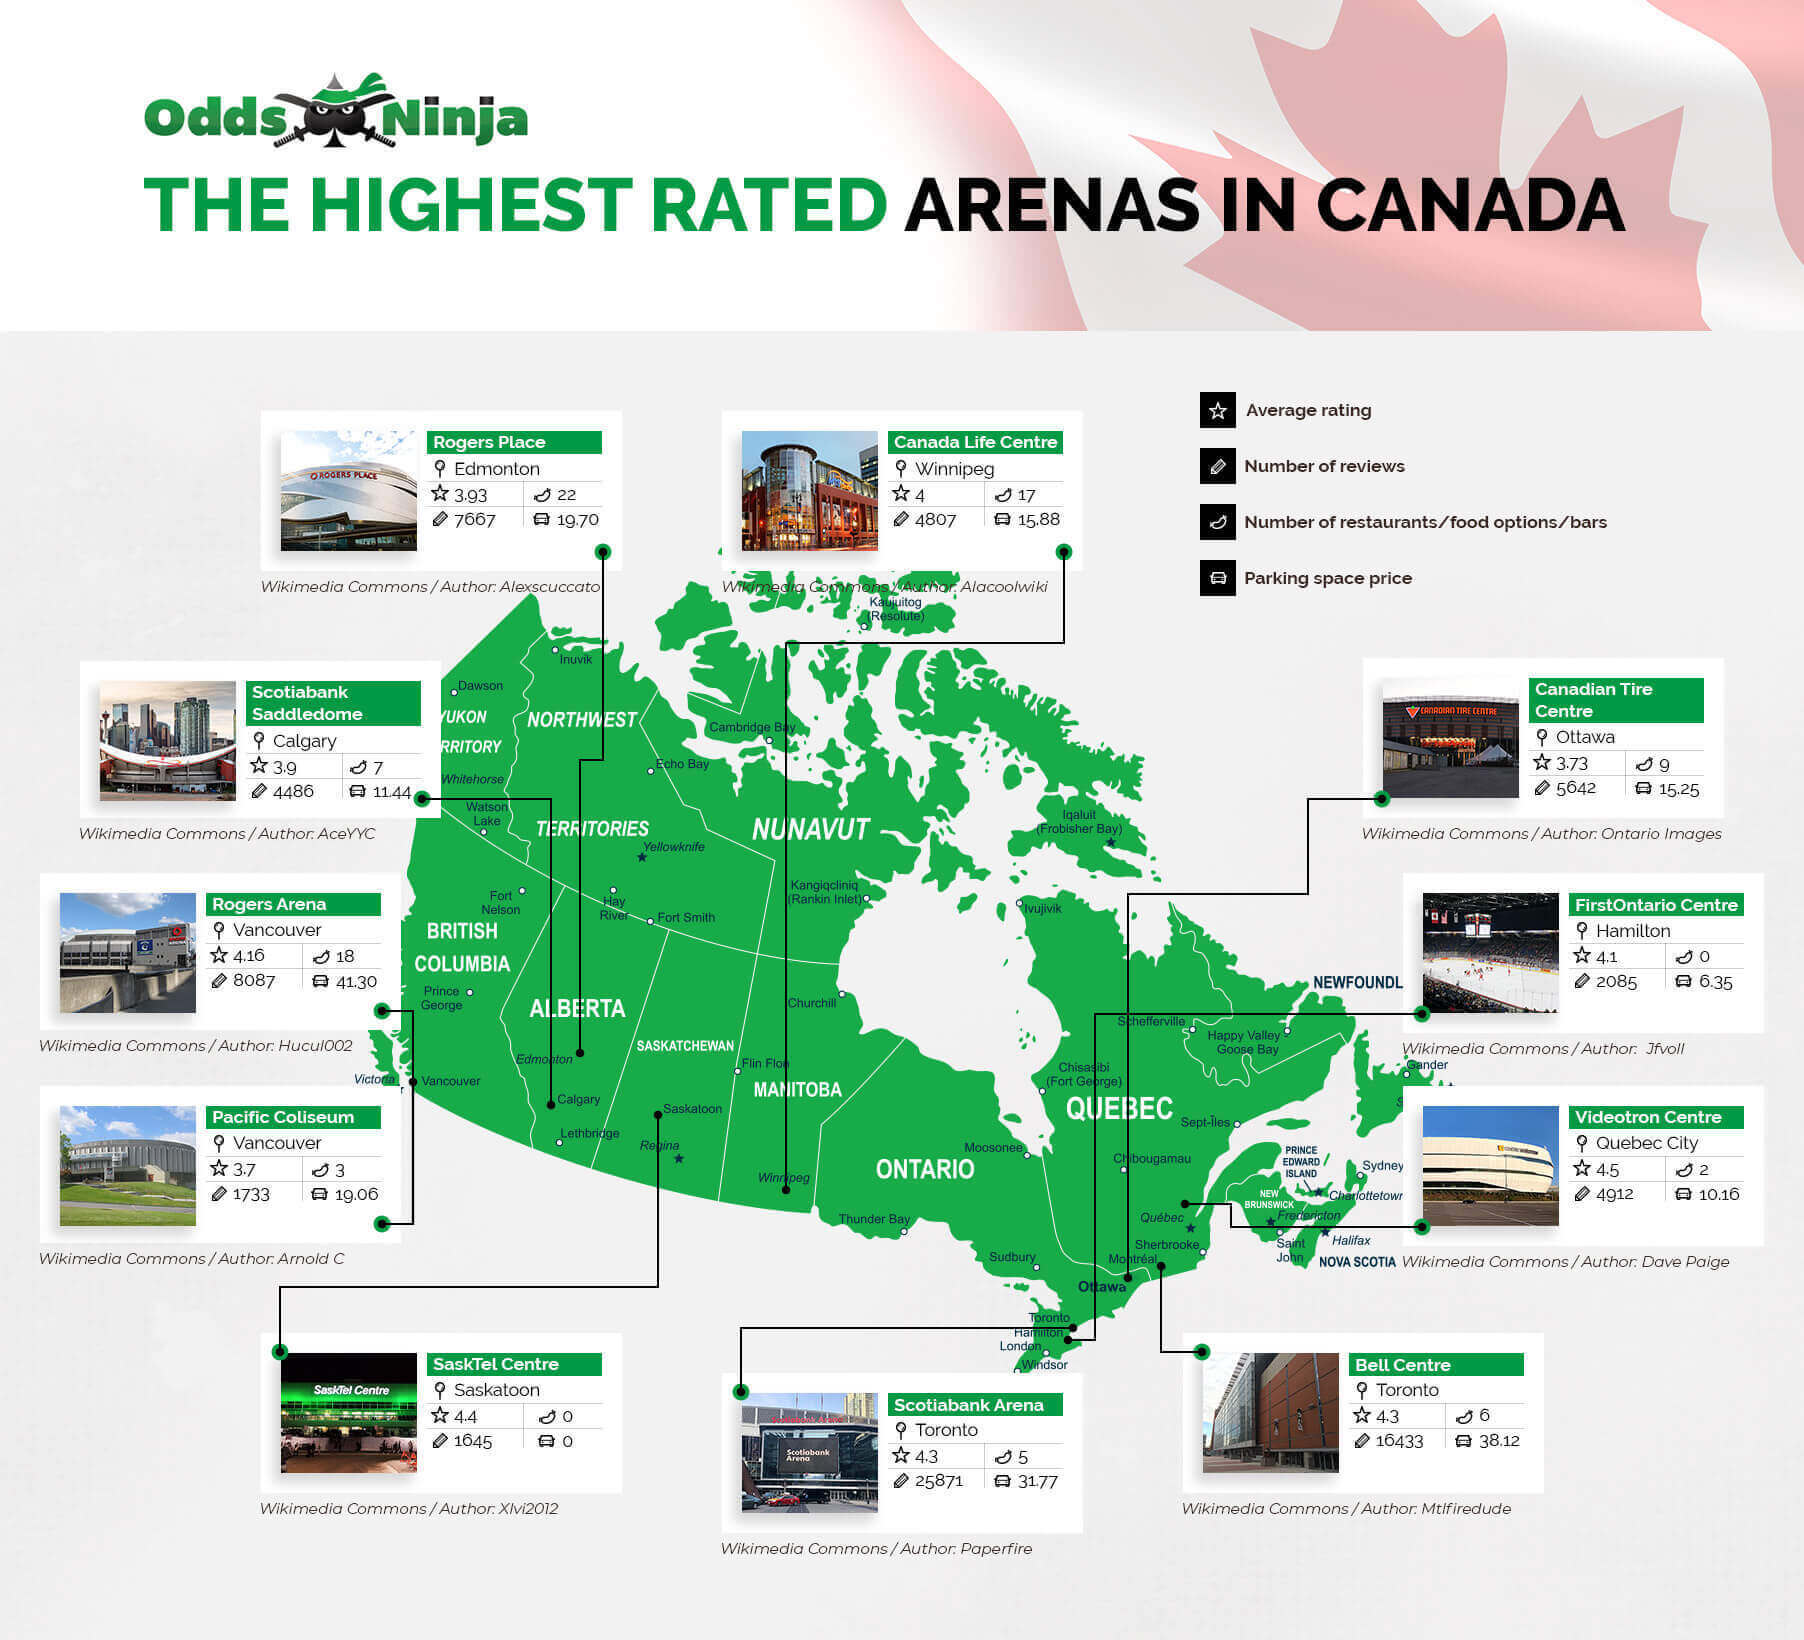 The highest rated arenas in Canada